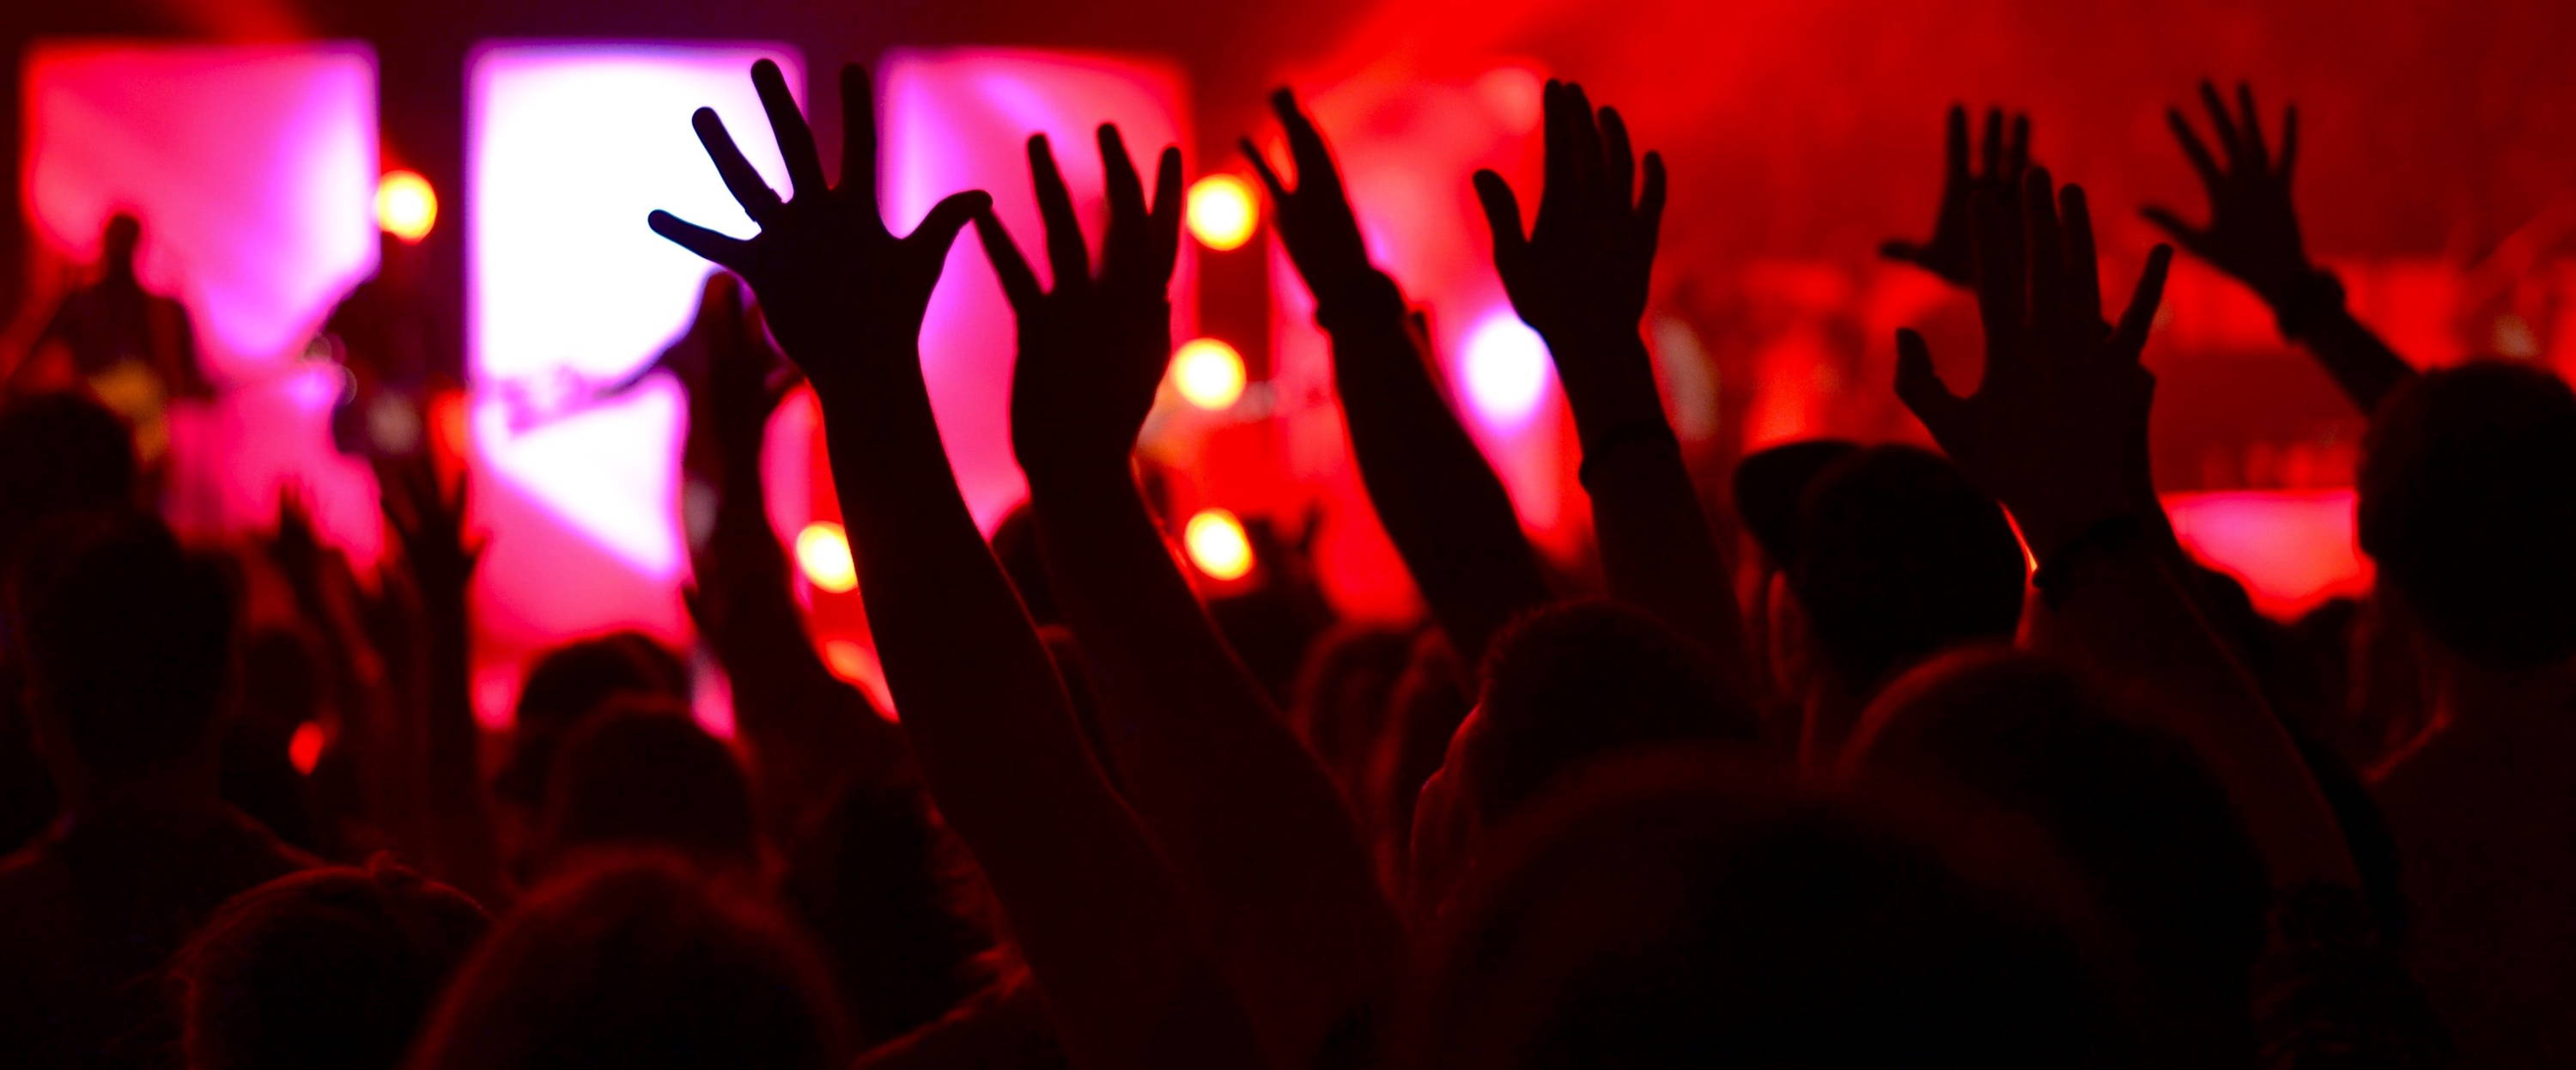 Arms raised in the crowd at a music concert 